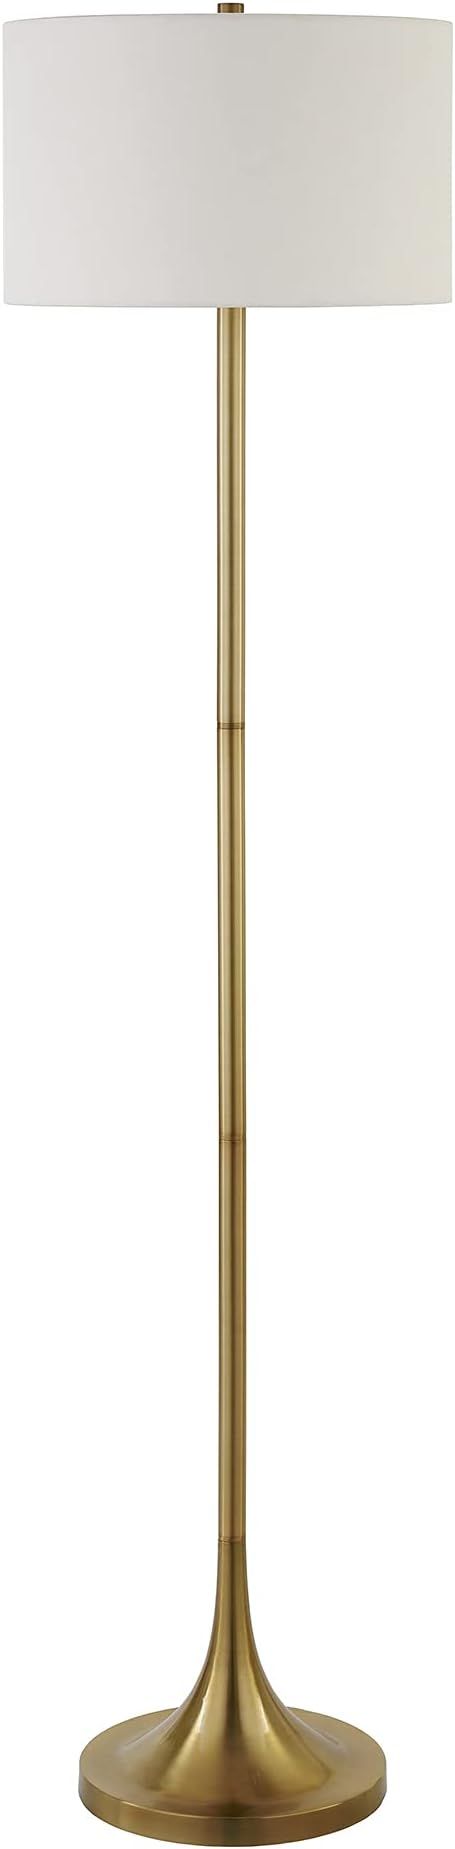 Josephine 62" Tall Floor Lamp with Fabric Shade in Brass/White | Amazon (US)